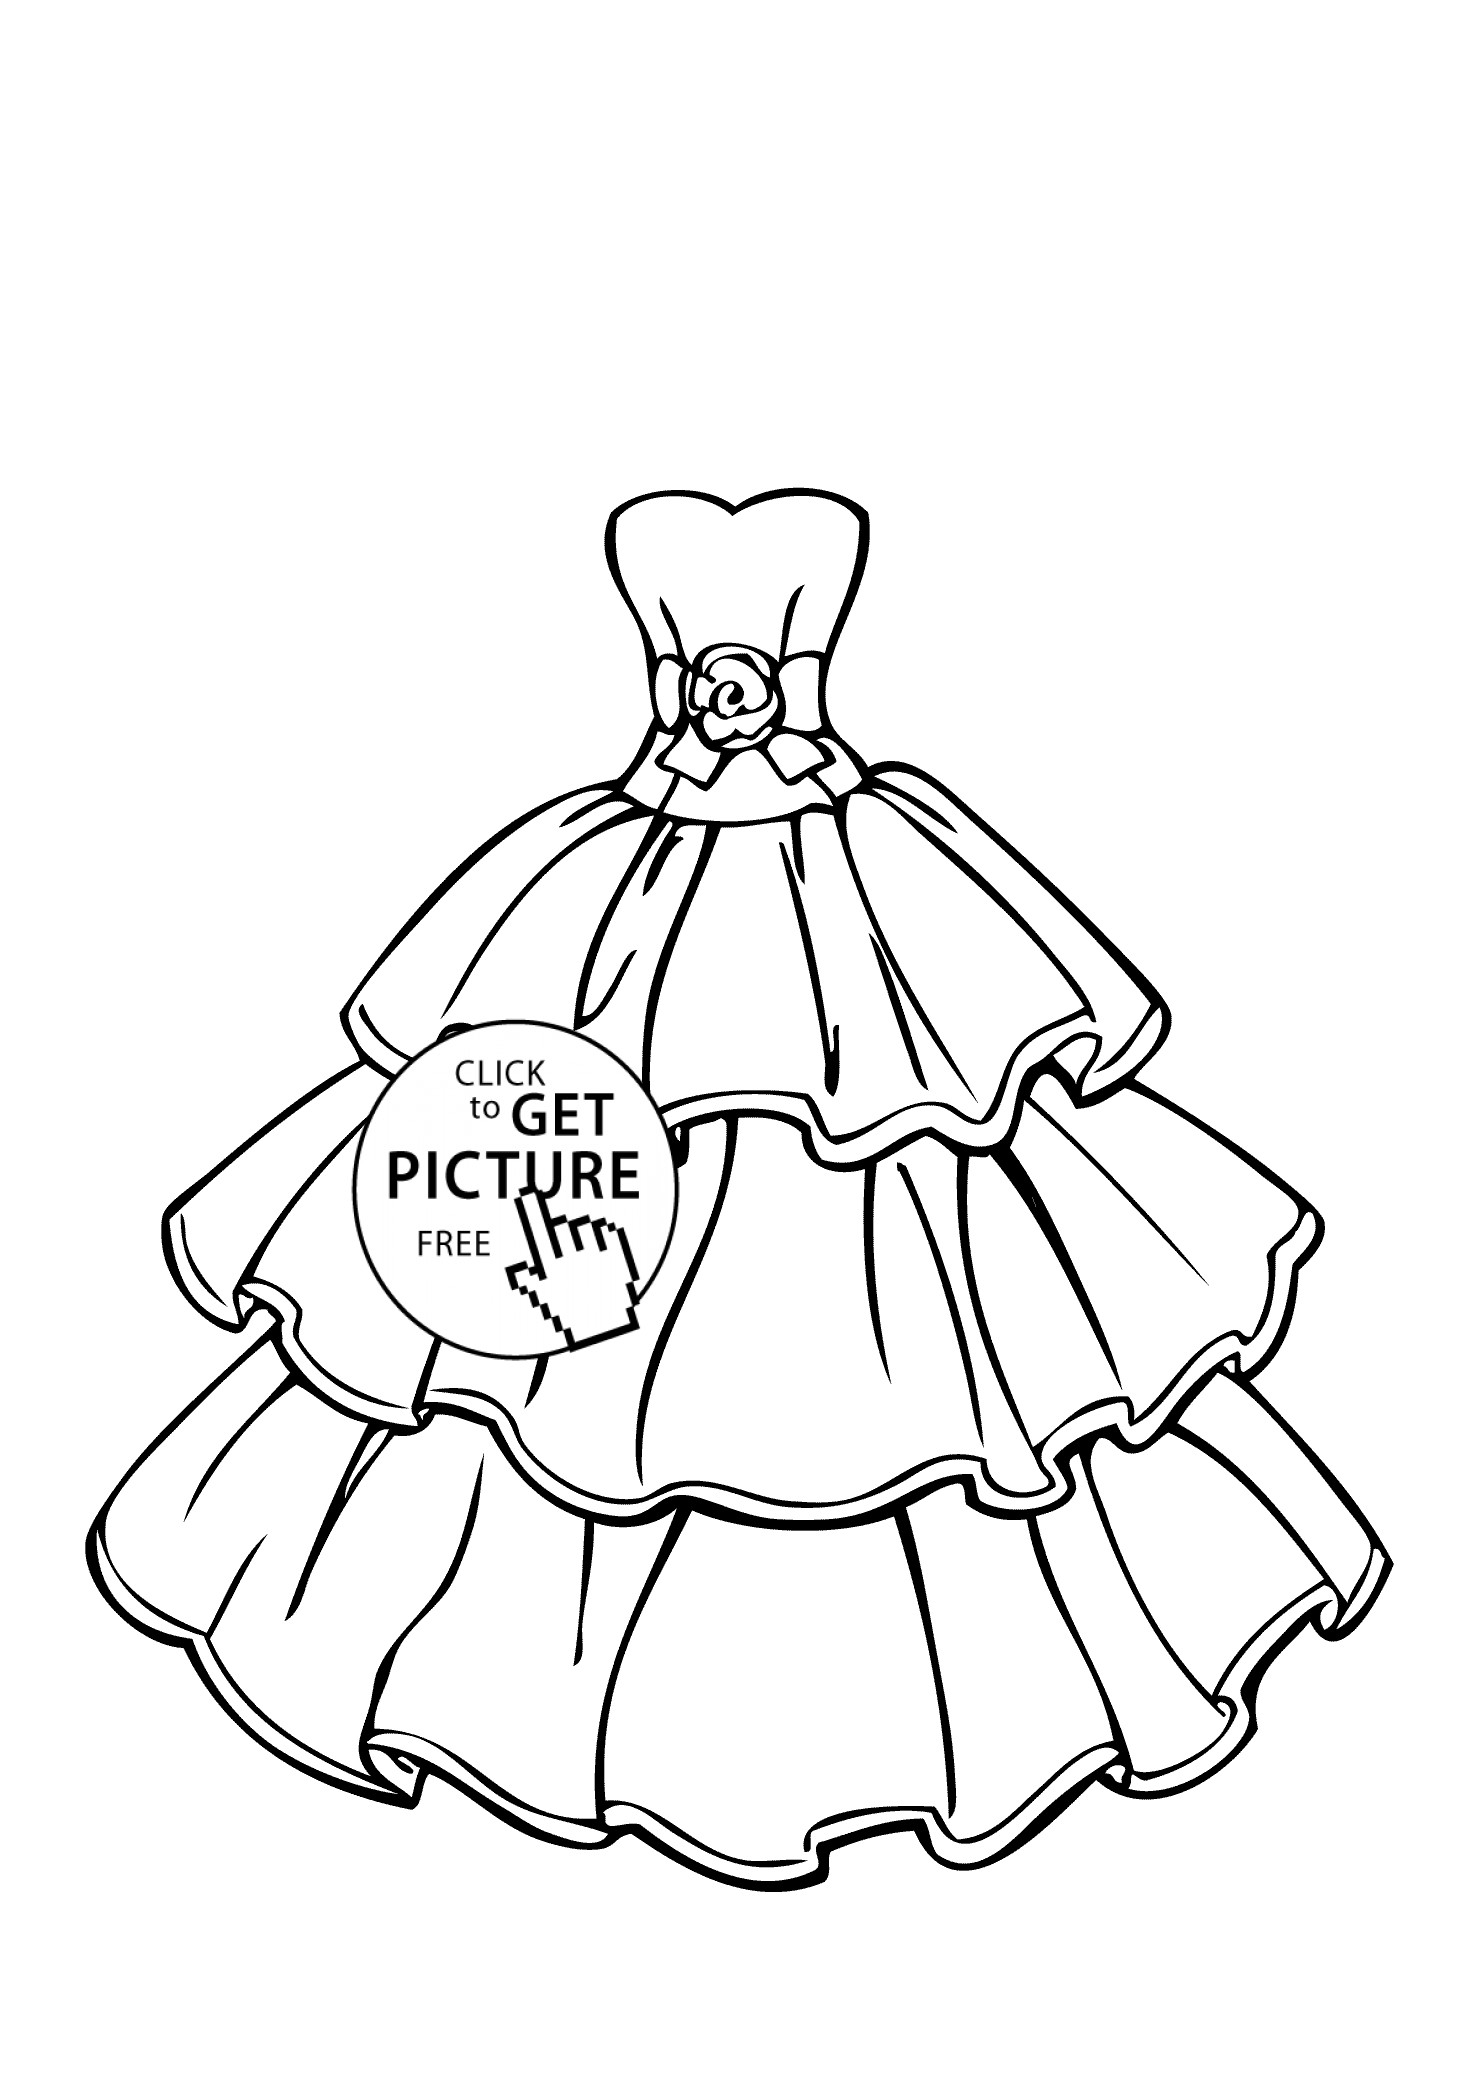 Wedding Dress Coloring Pages
 Wedding dress beautiful coloring page for girls printable